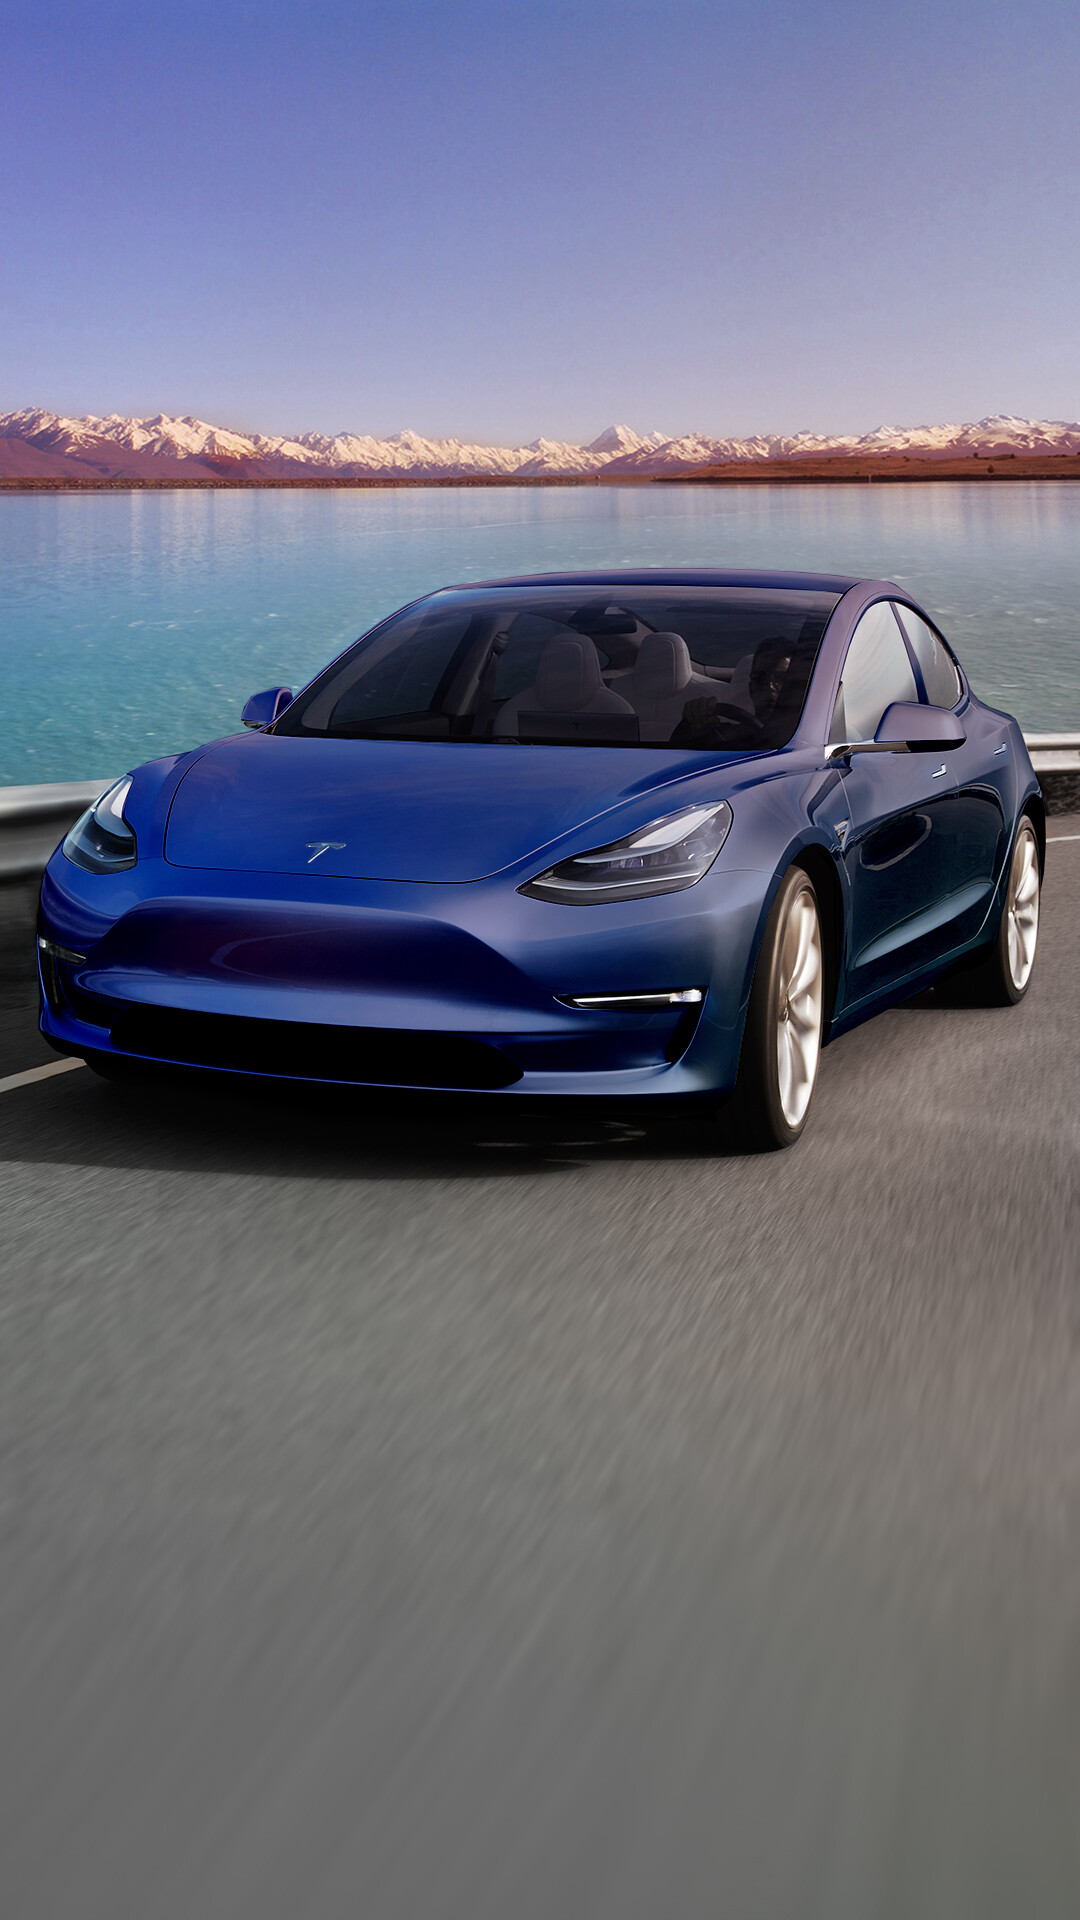 Tesla Model Y: A battery electric compact crossover manufactured by American company. 1080x1920 Full HD Background.